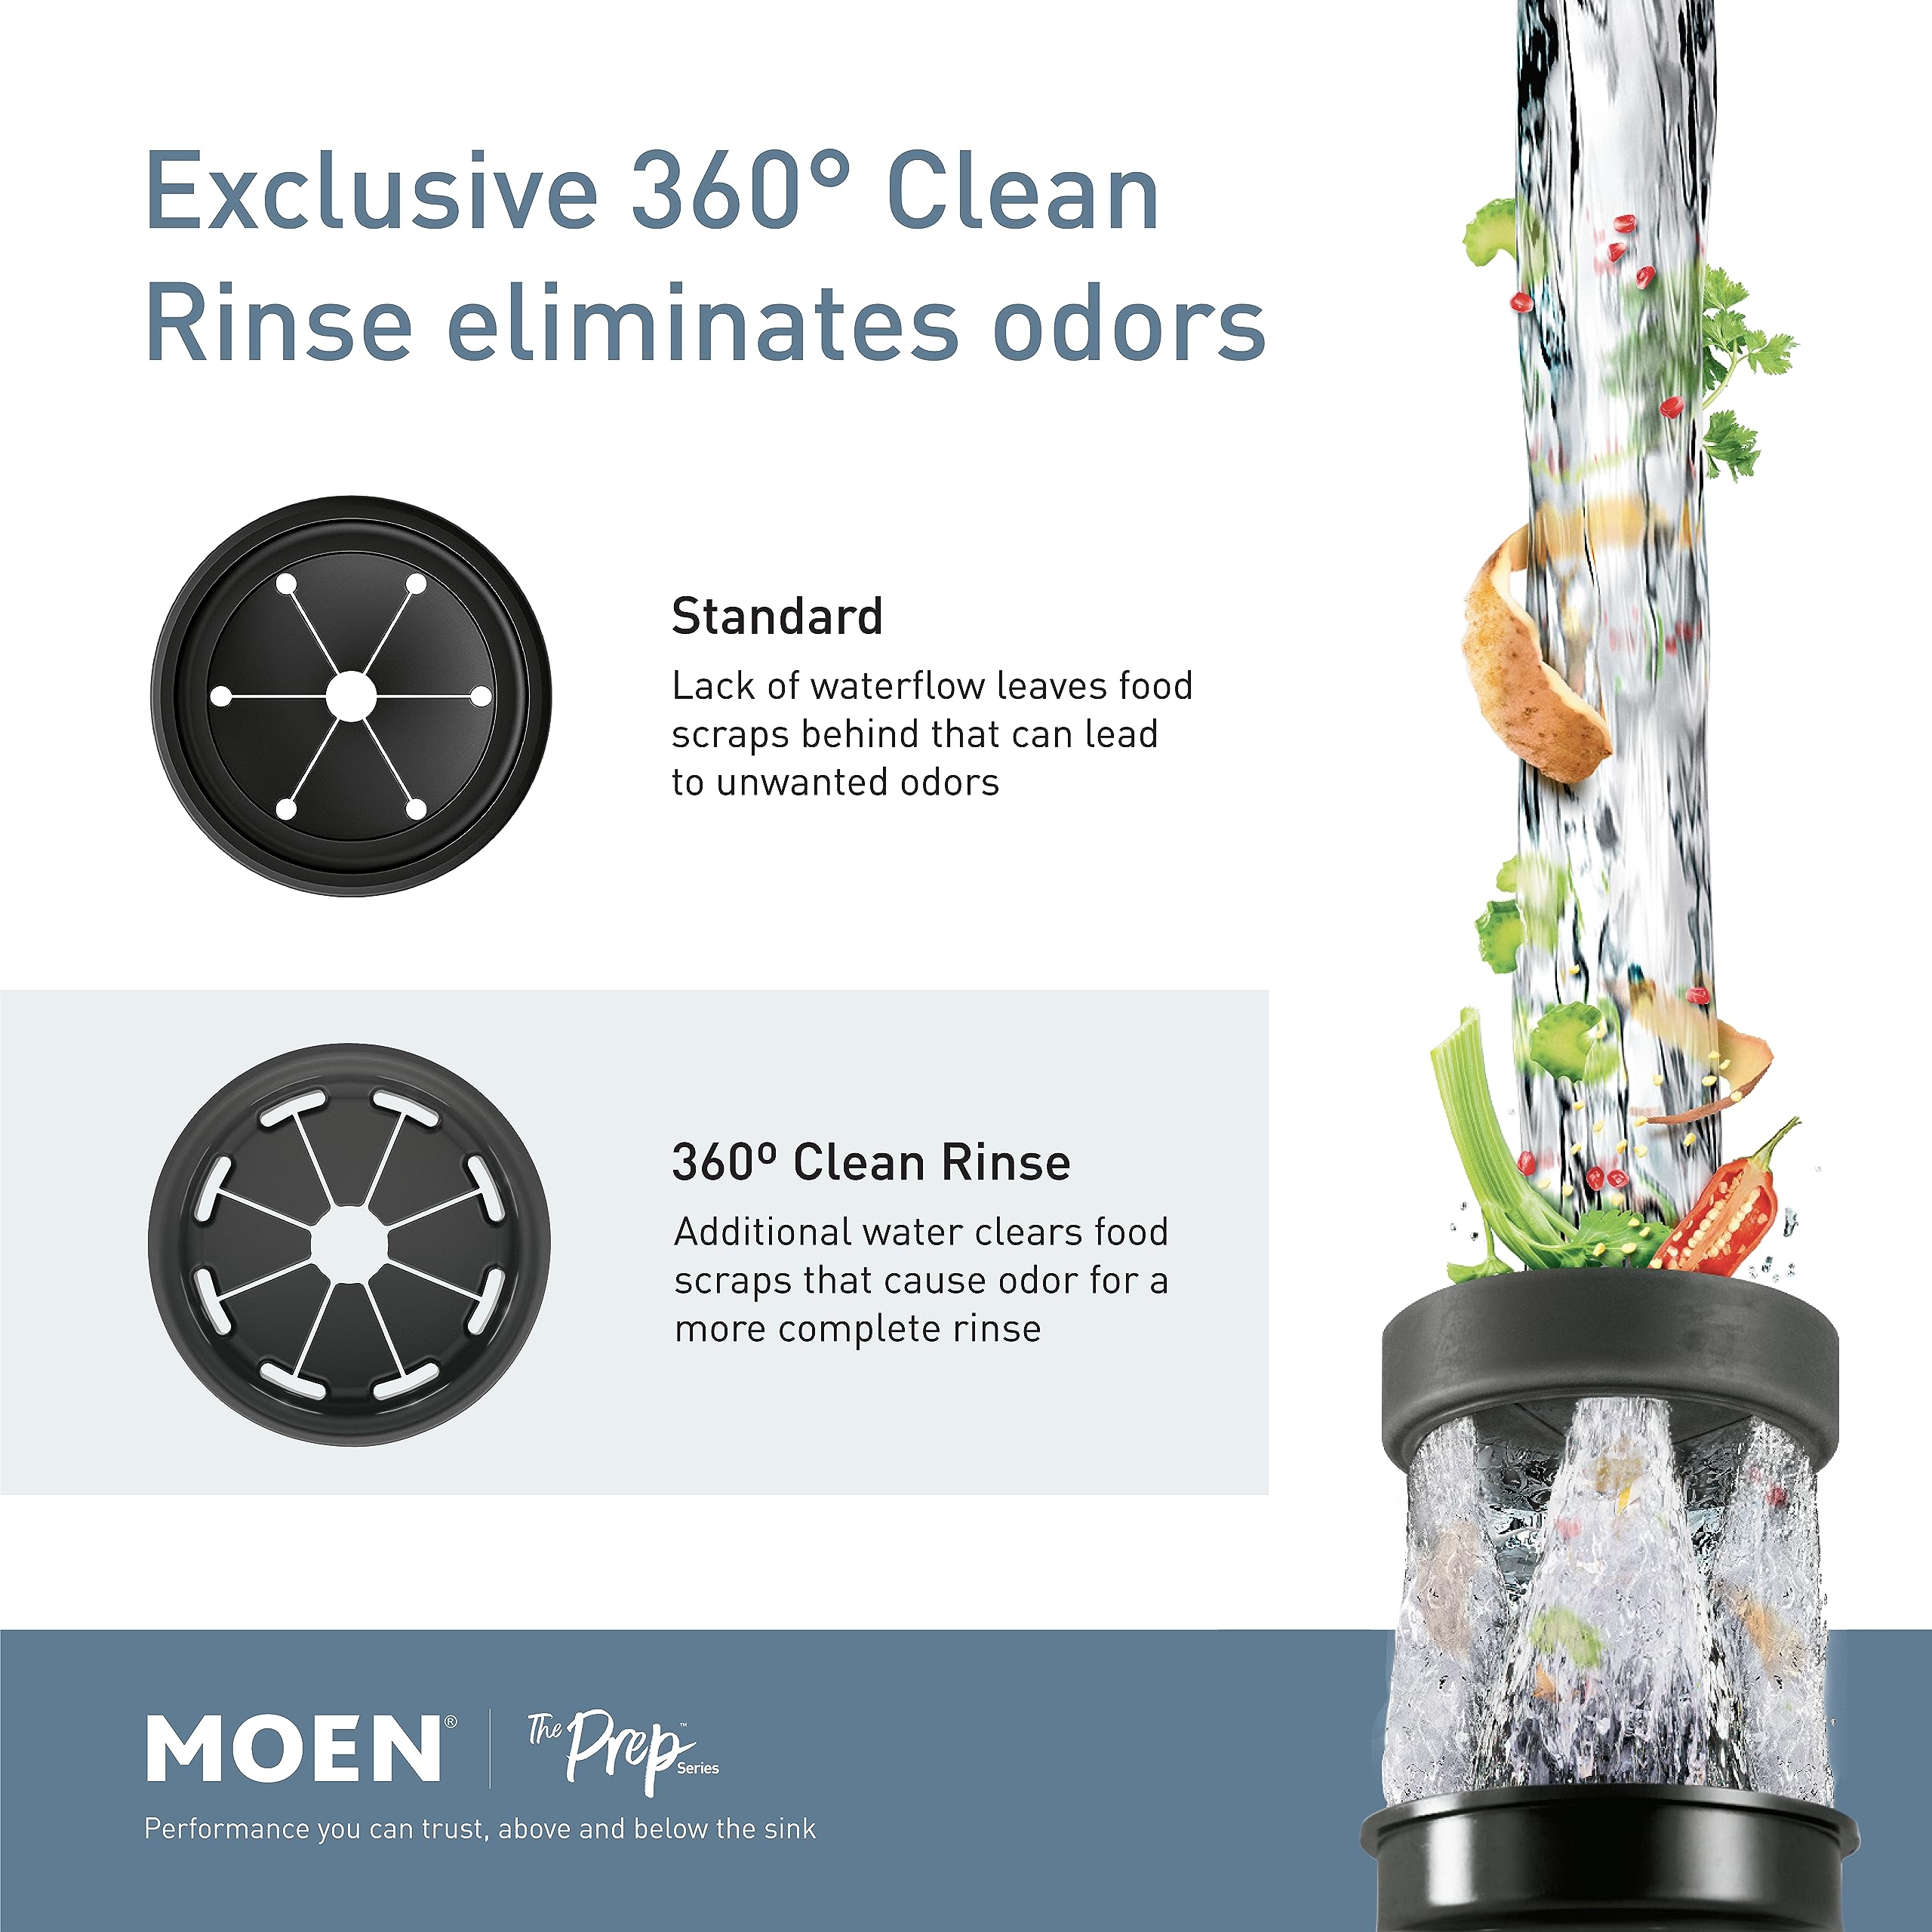 Moen GX50C Disposer Prep Series 1/2 HP Continuous Feed Garbage Disposal with Sound Reduction, Power Cord Included